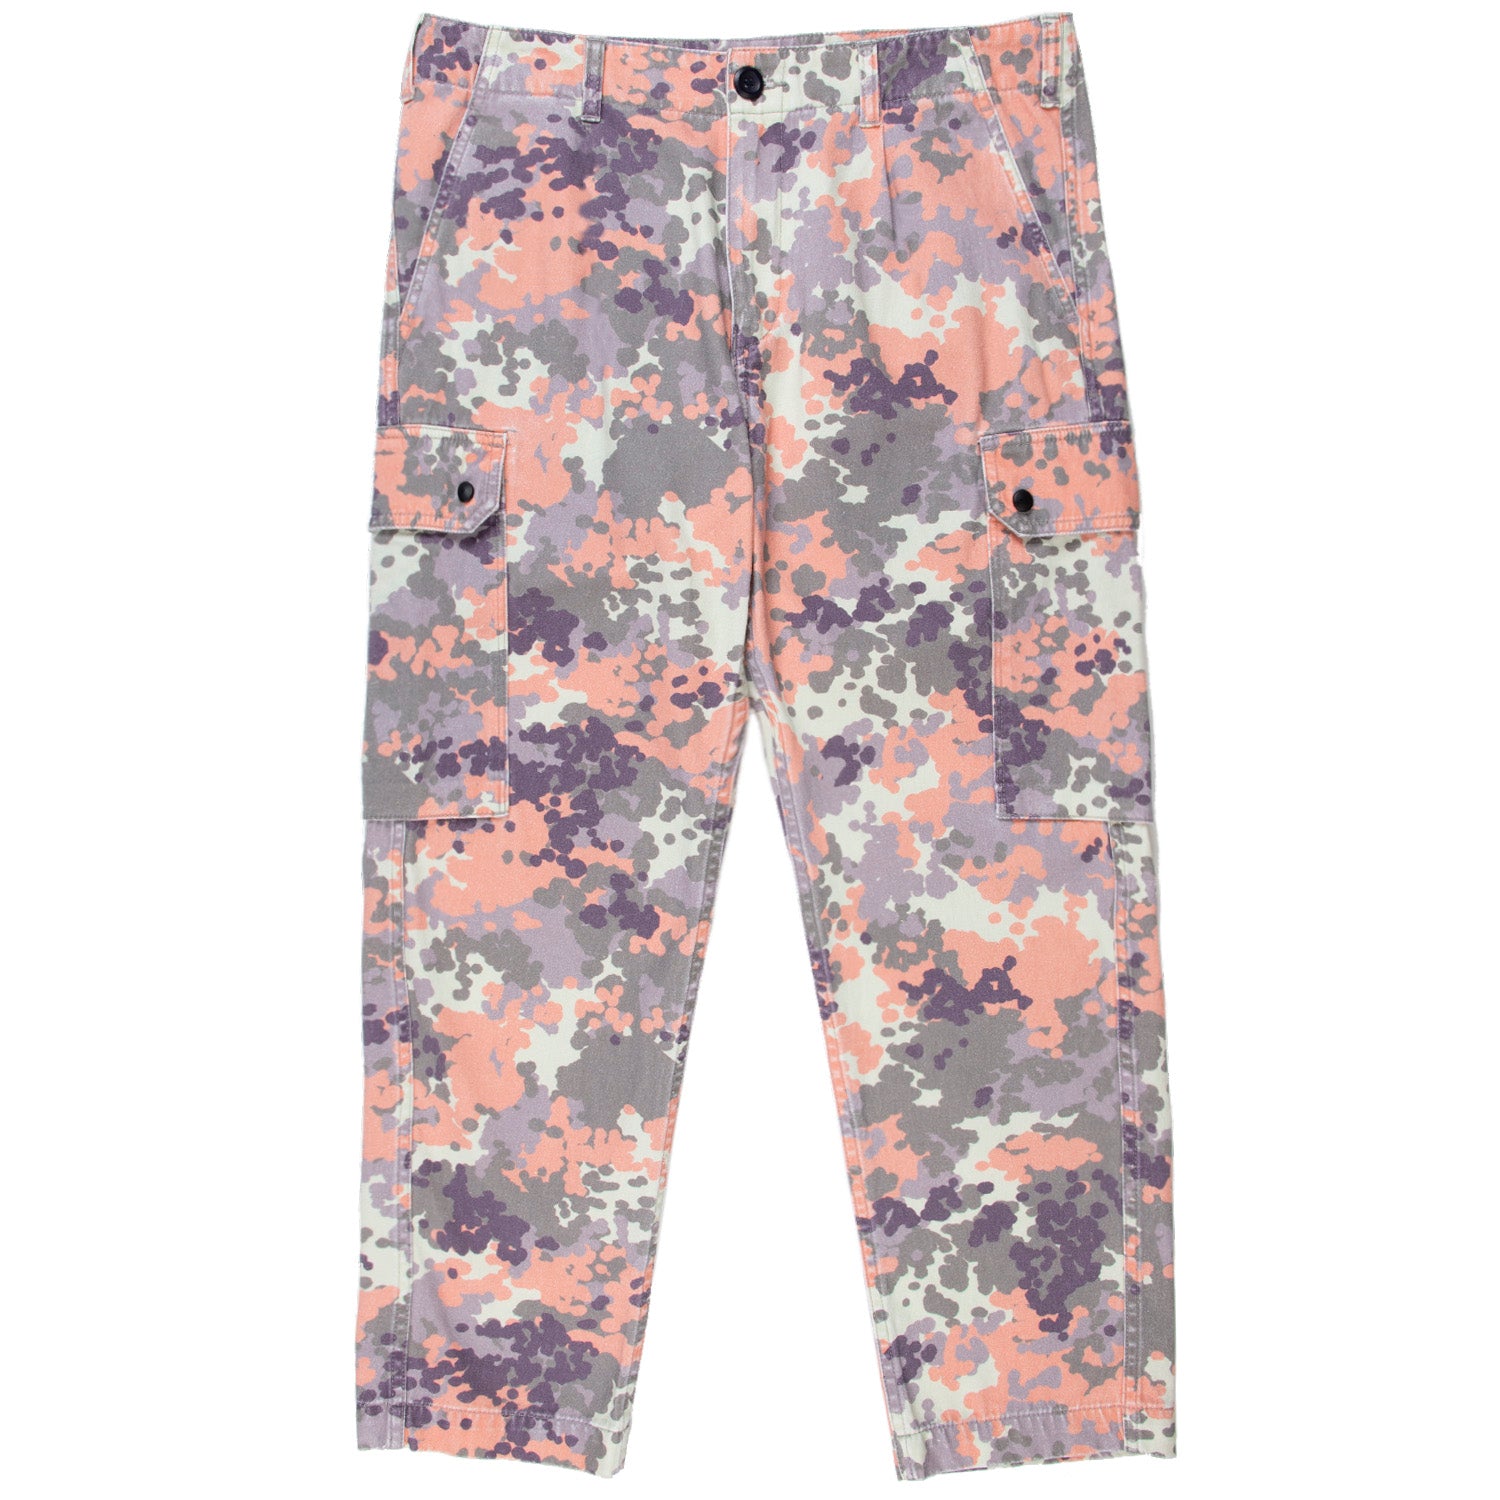 Mosh Pit Pant Disrupted Camo